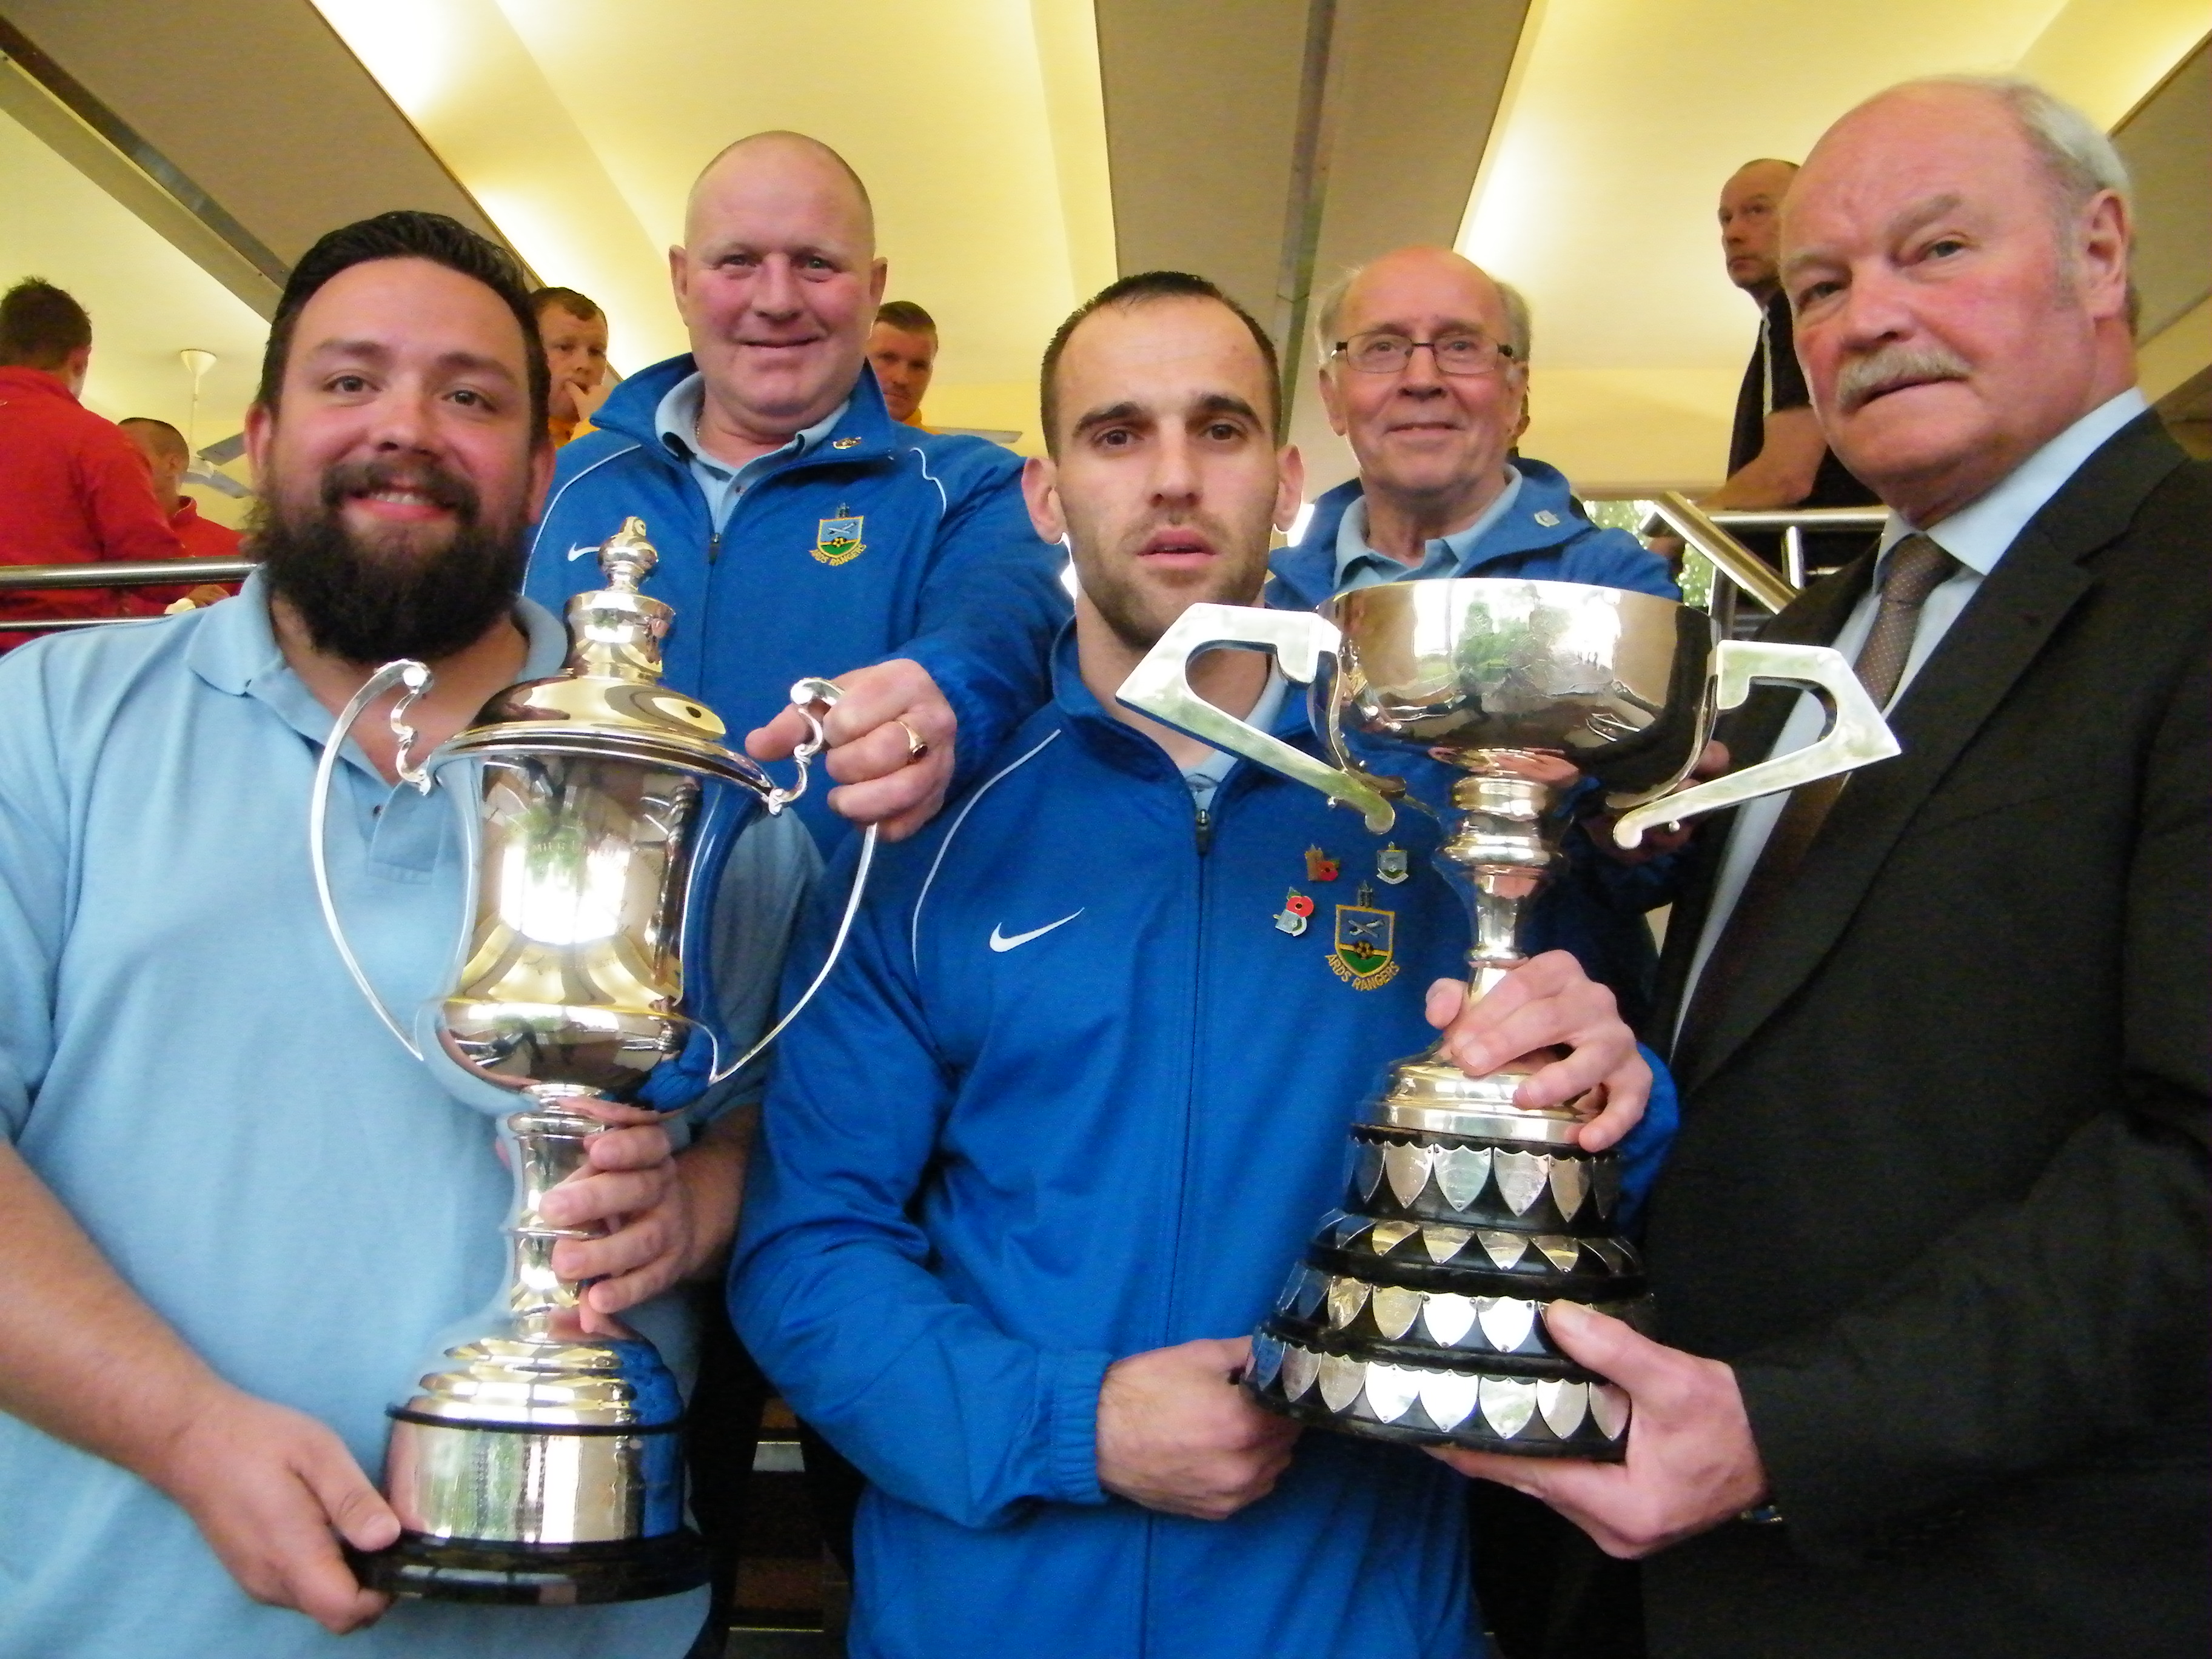 Ards Rgs double winners Premier & Border Cup 